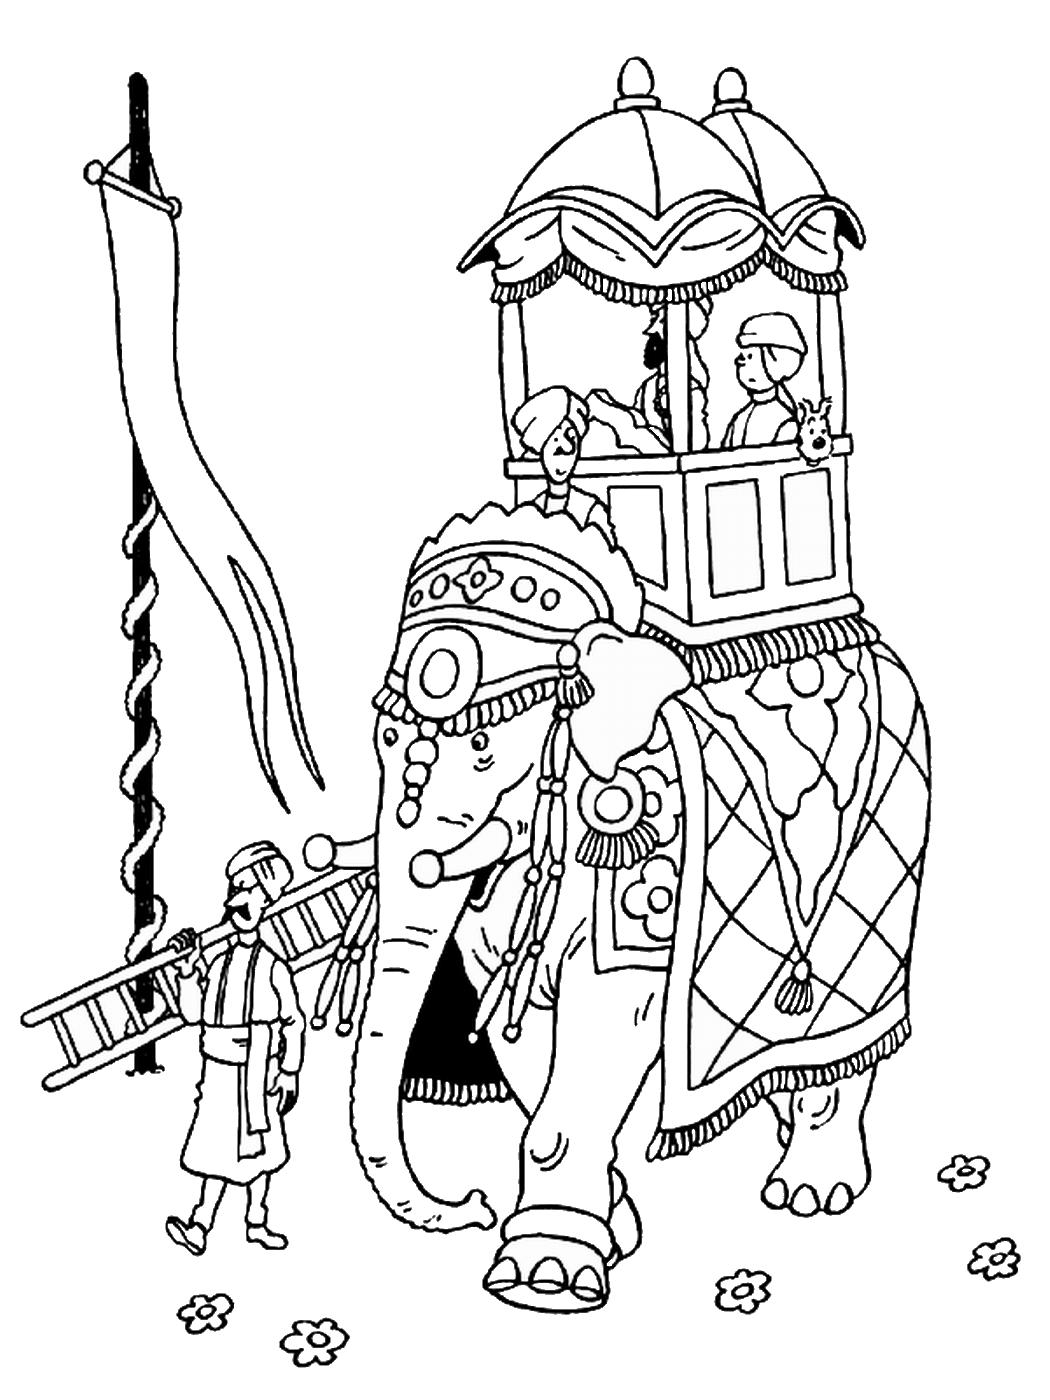 Tintin Coloring Pages Cartoons tintin_cl_17 Printable 2020 6712 Coloring4free